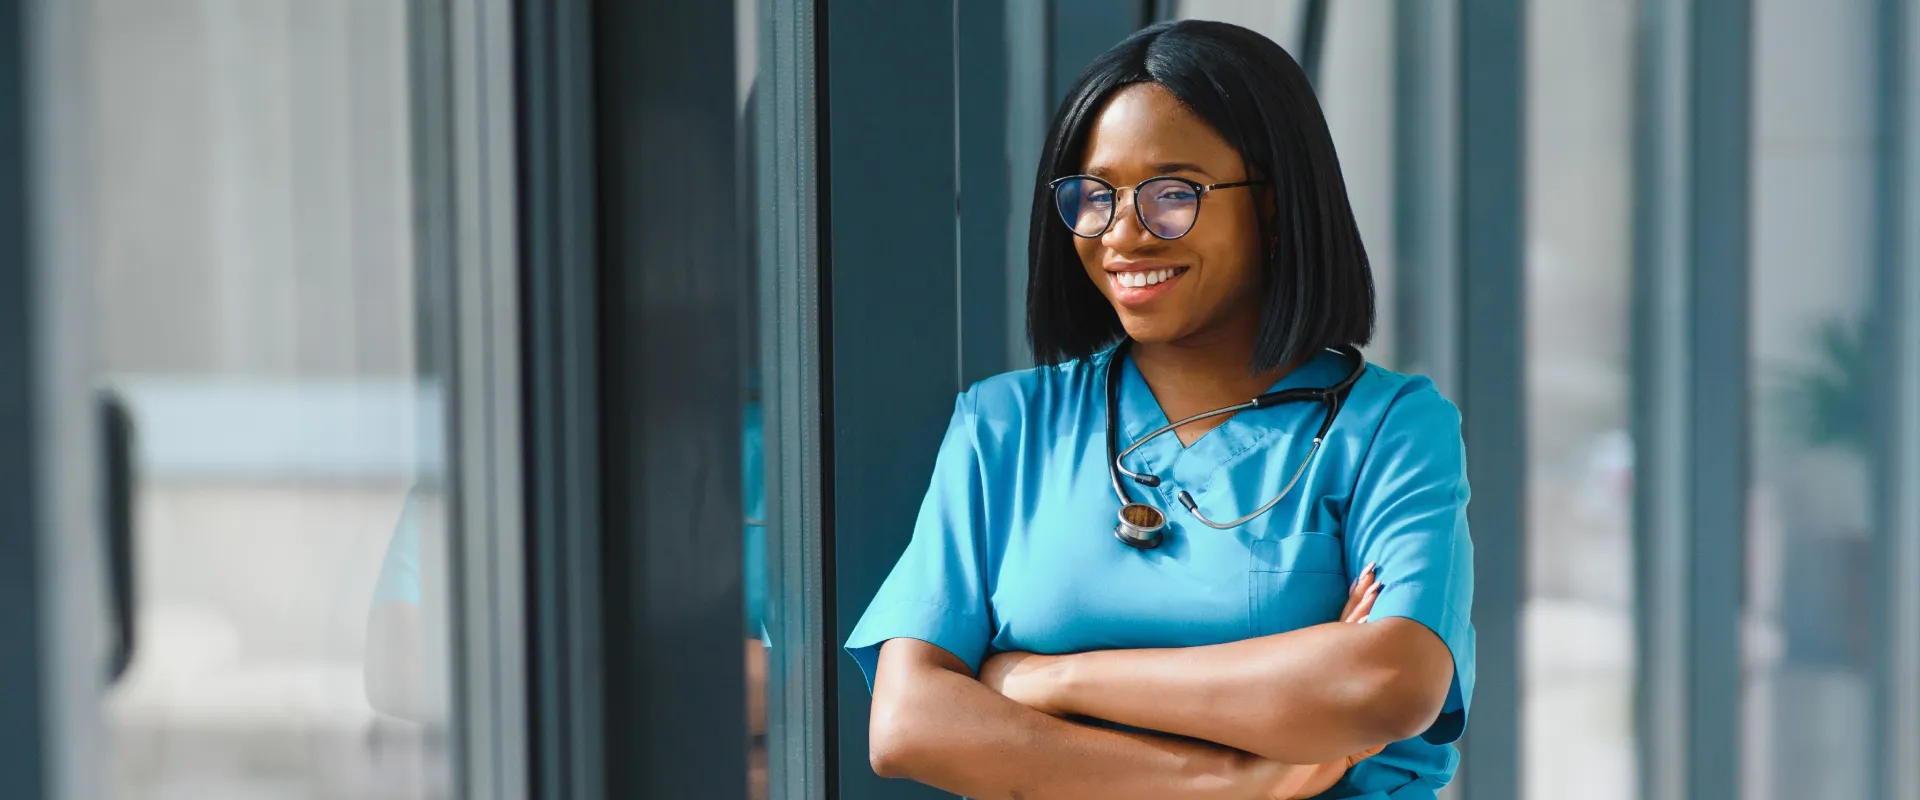 What You Should Know Before Becoming a Nurse?